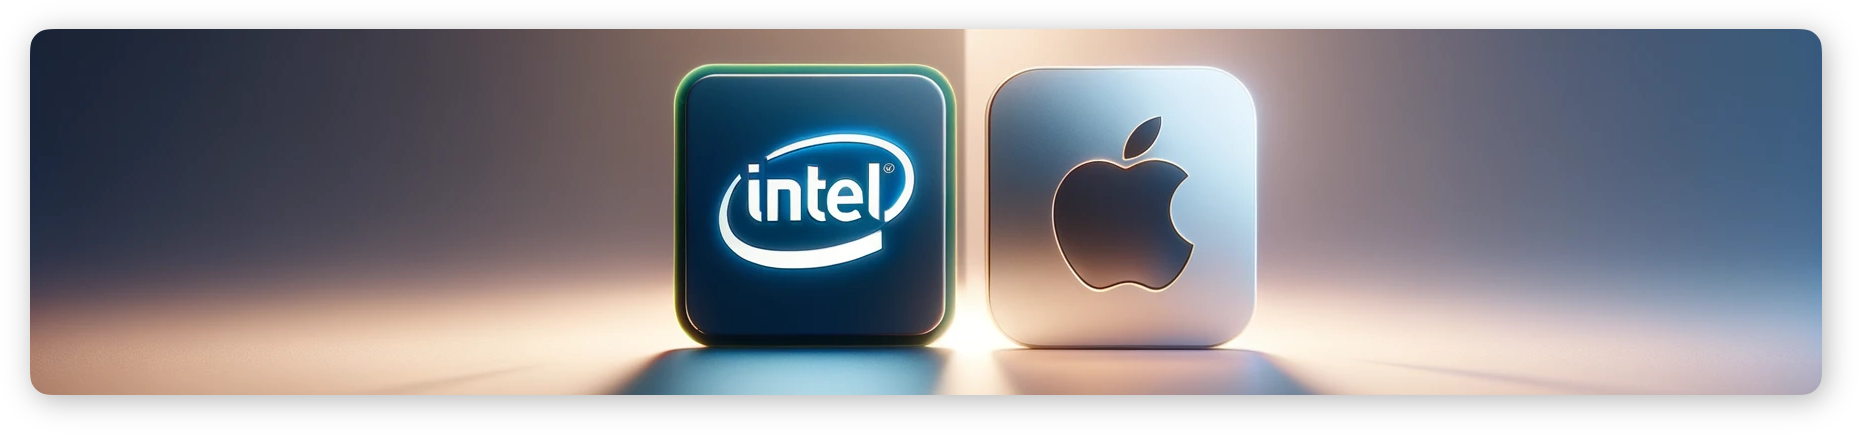 Intel and Apple Silicon CPUs indicating compatibility of TG Pro with both platforms.